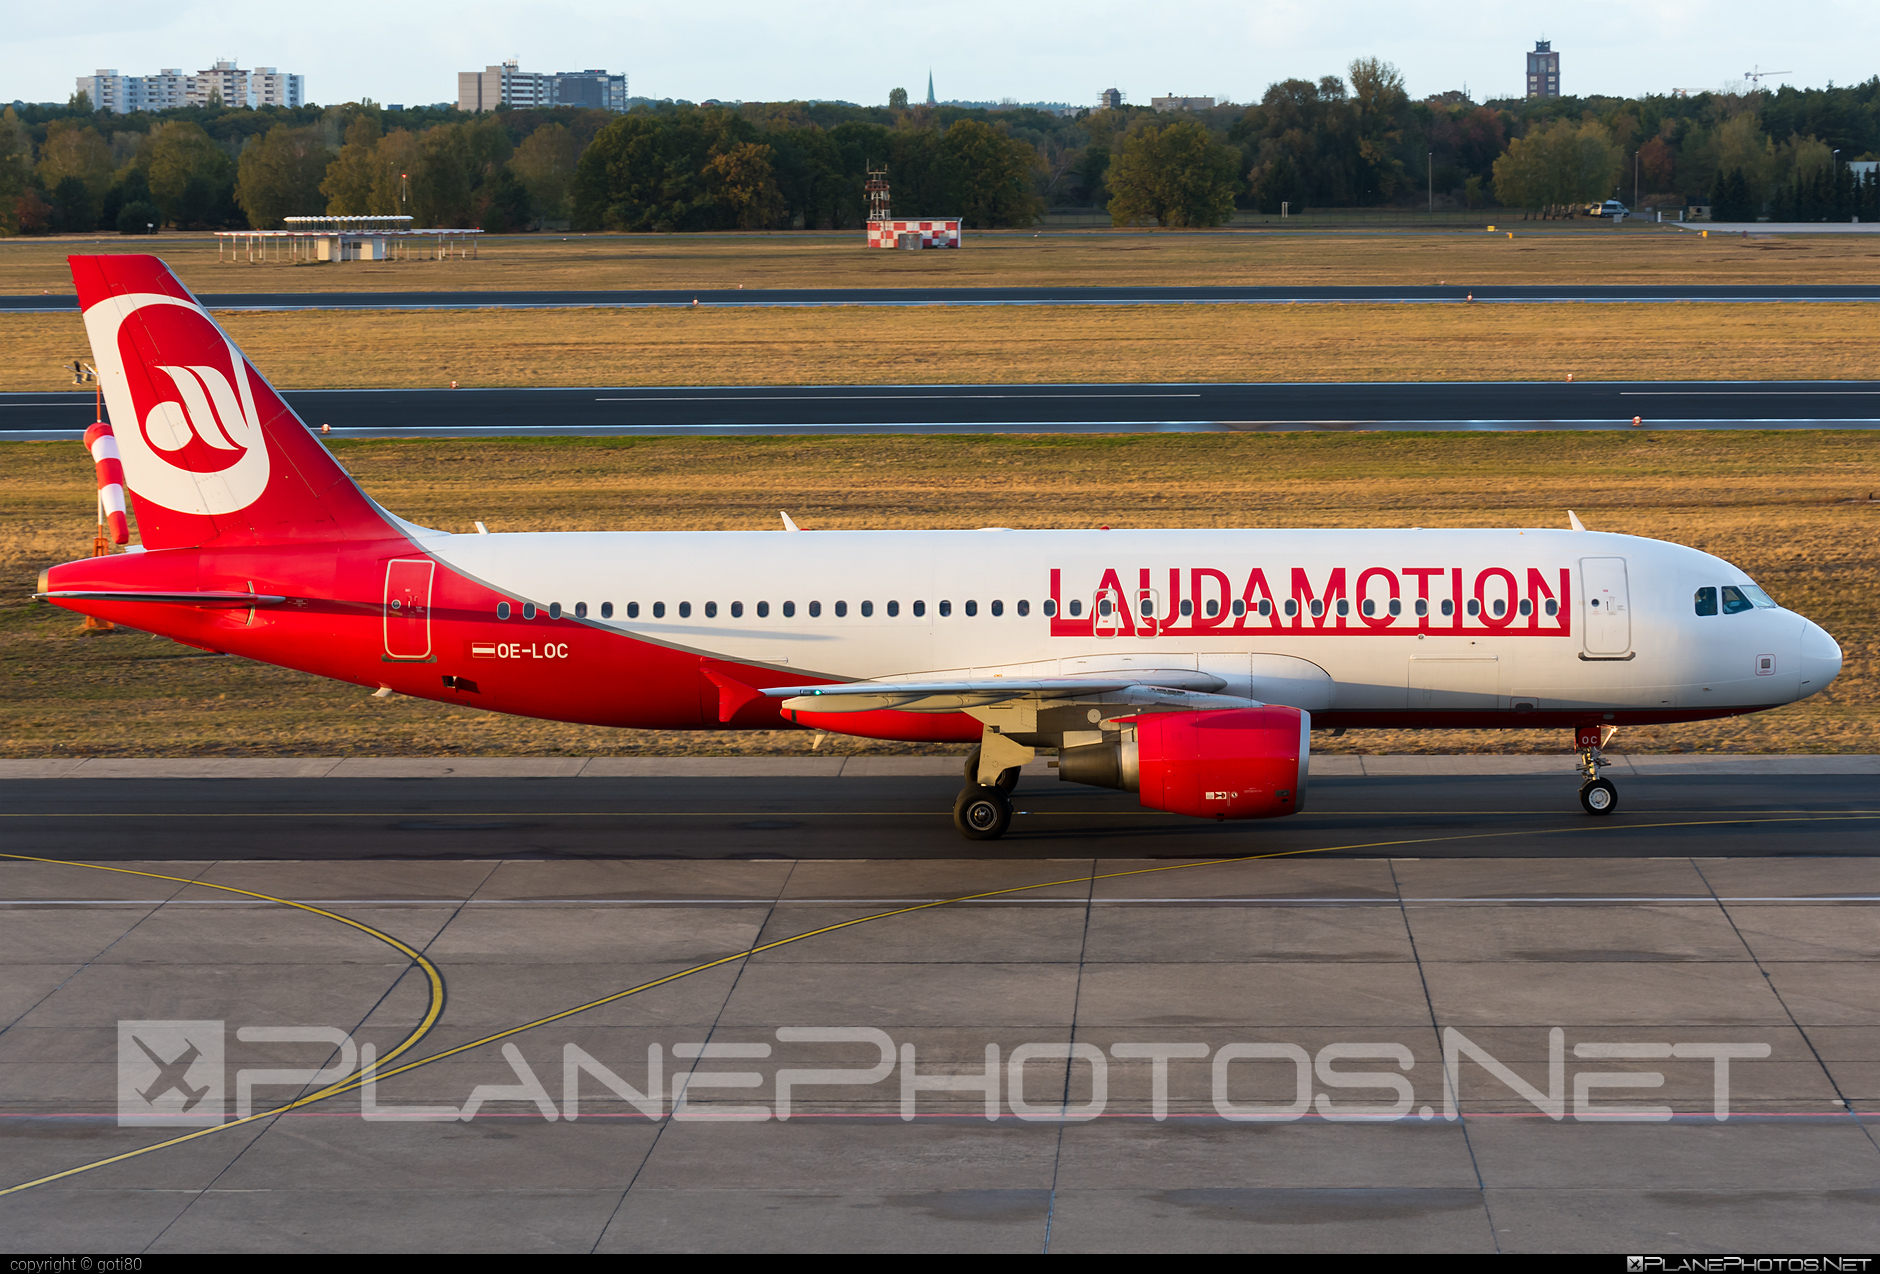 Airbus A320-214 - OE-LOC operated by LaudaMotion #a320 #a320family #airbus #airbus320 #laudamotion